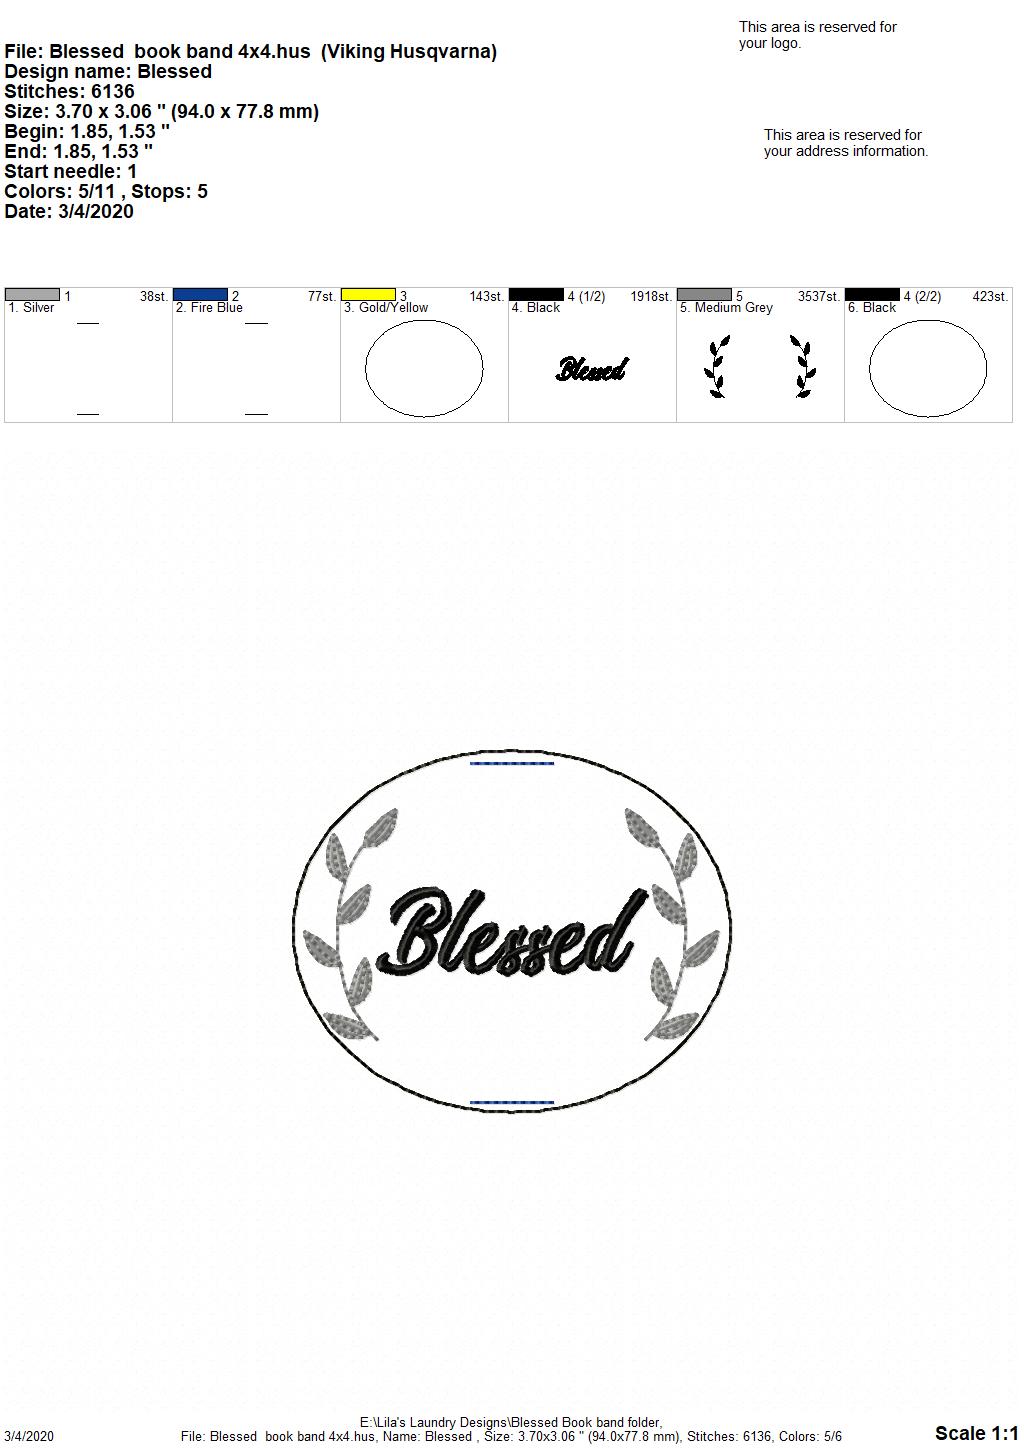 Blessed Book Band - Digital Embroidery Design